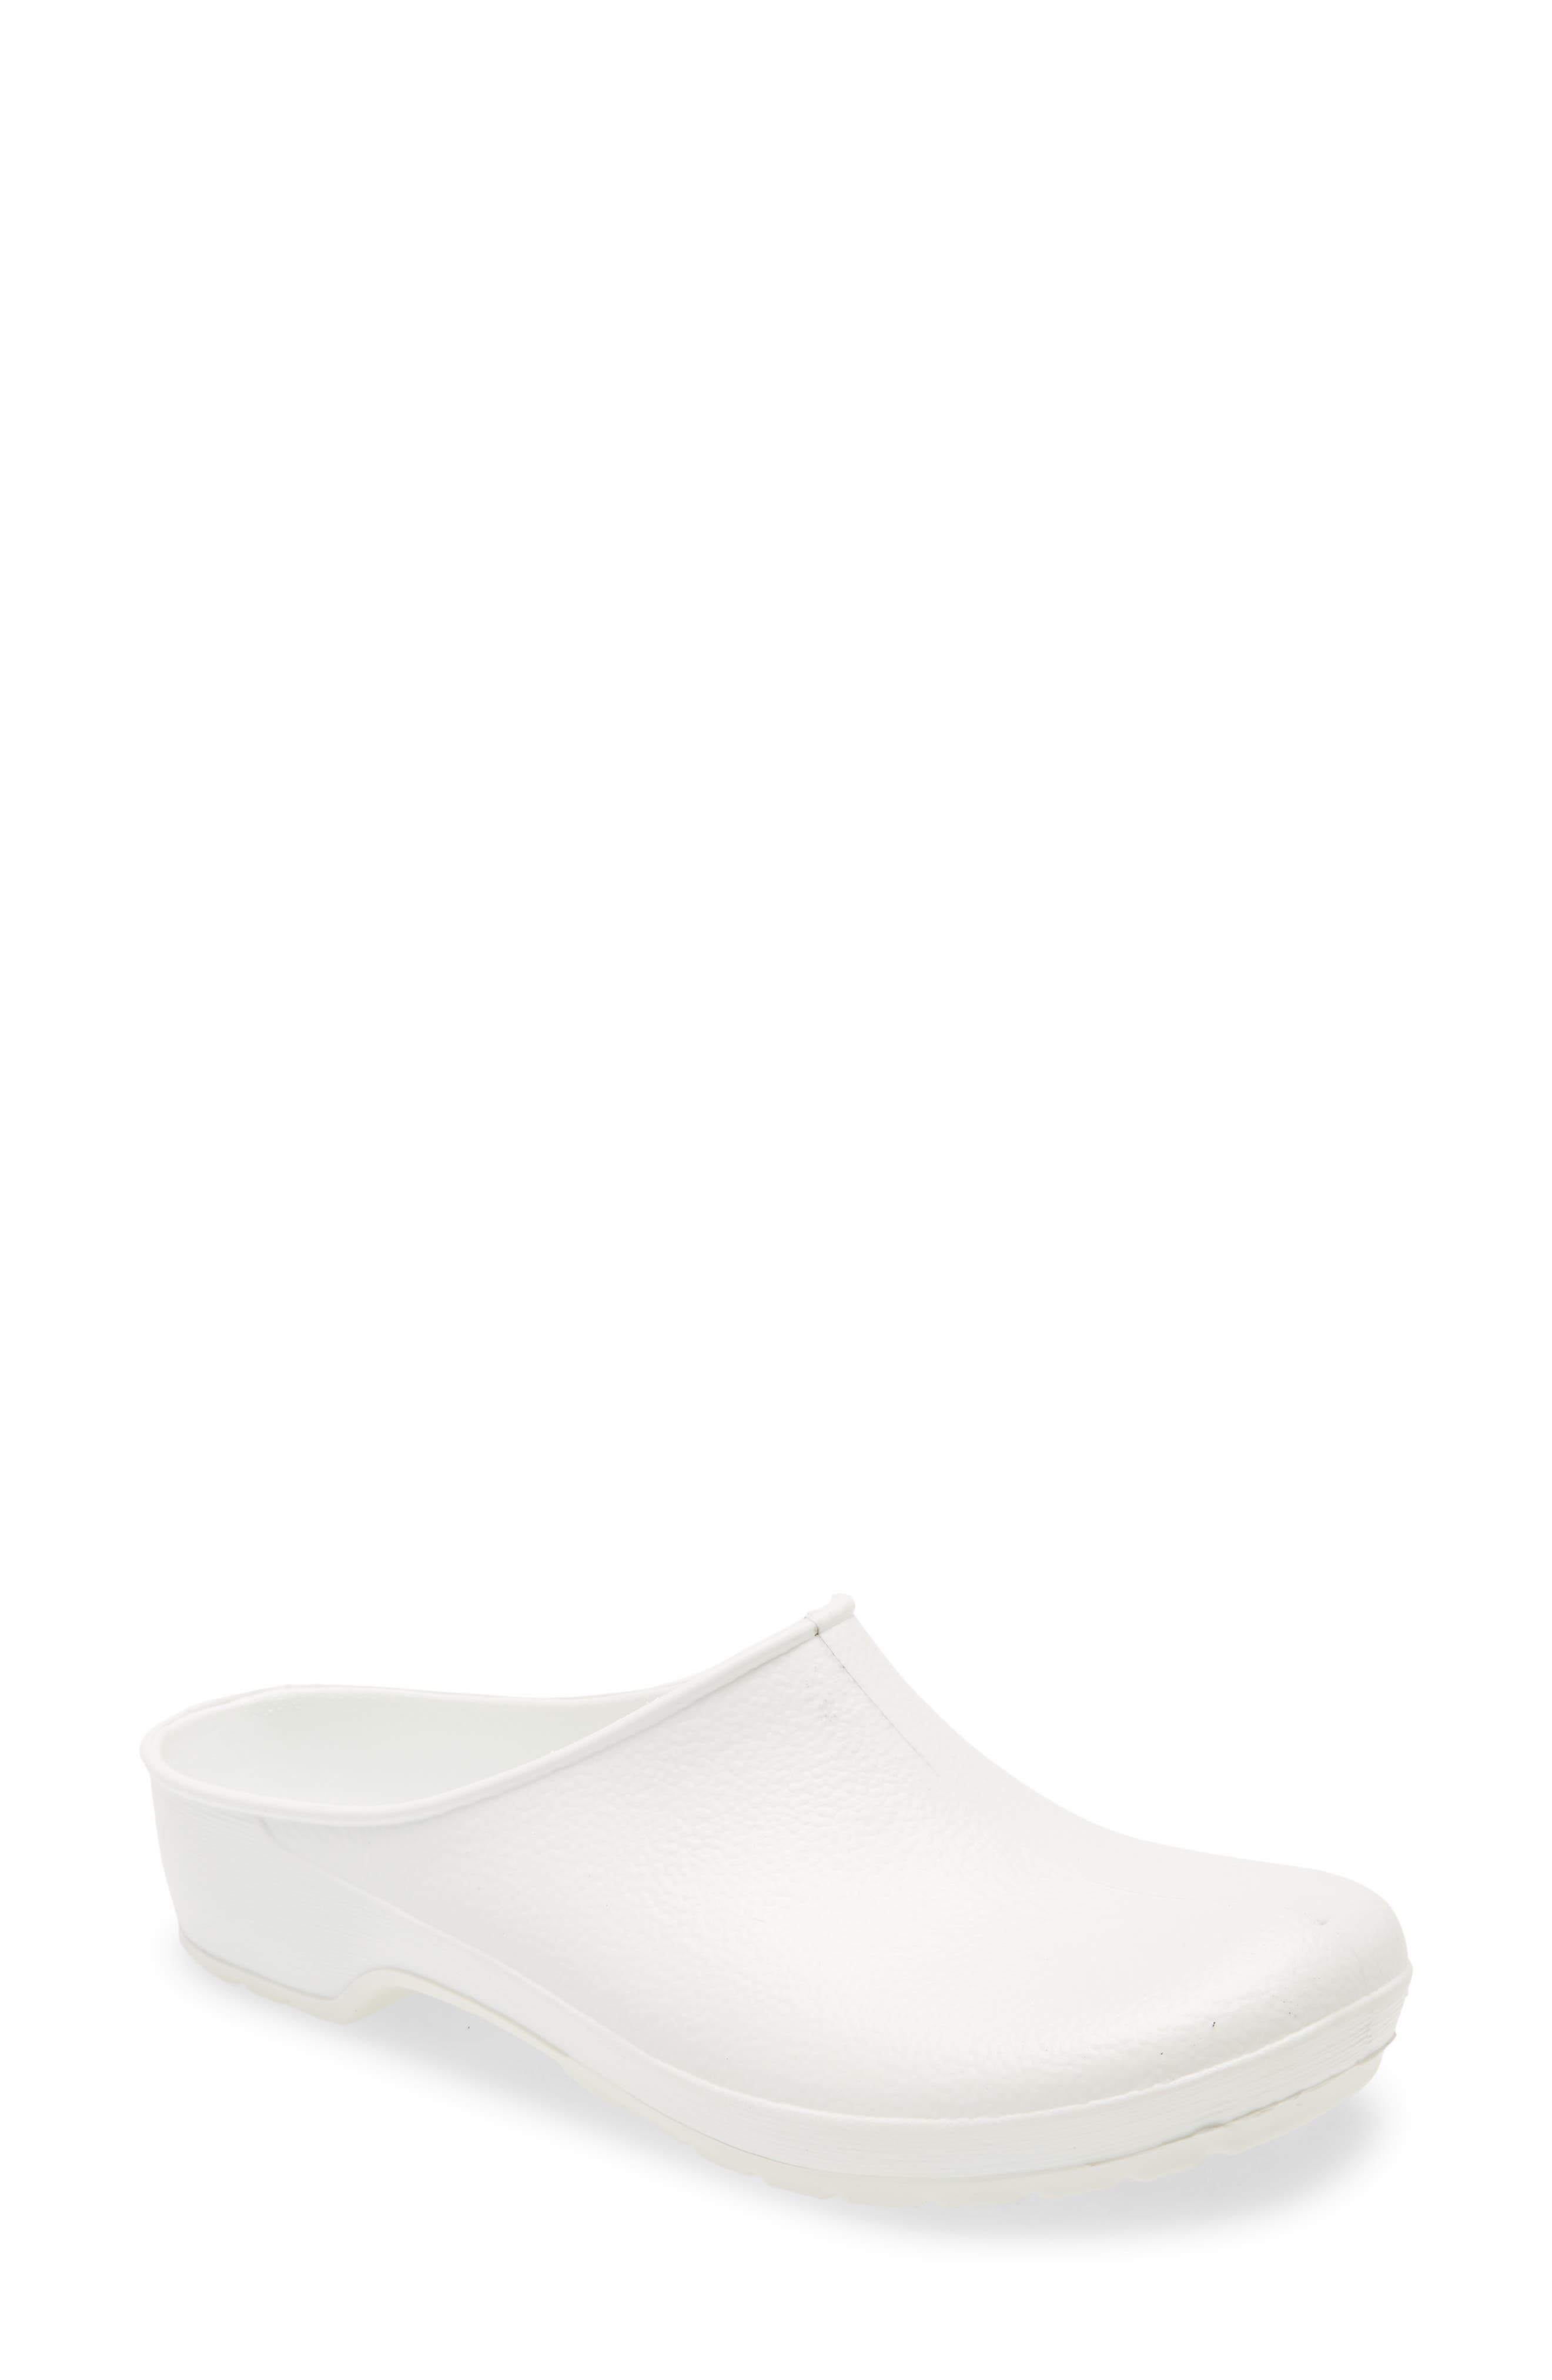 Women's Naot Shoes | Nordstrom